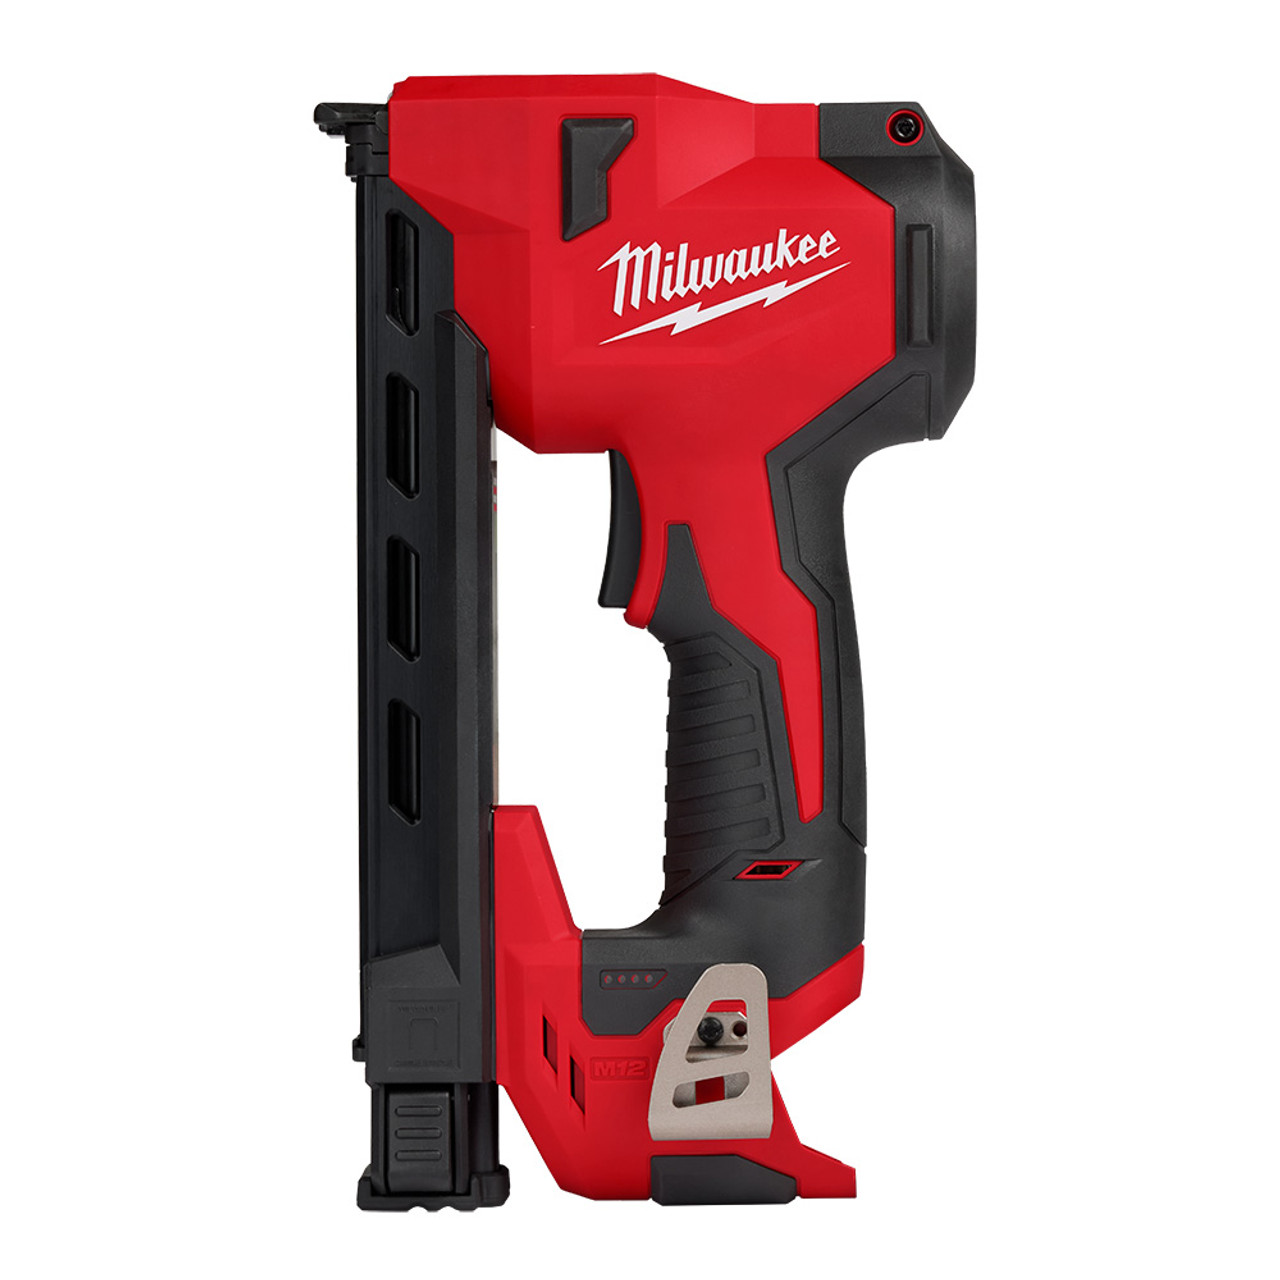 M12 CABLE STAPLER • Tool Academy